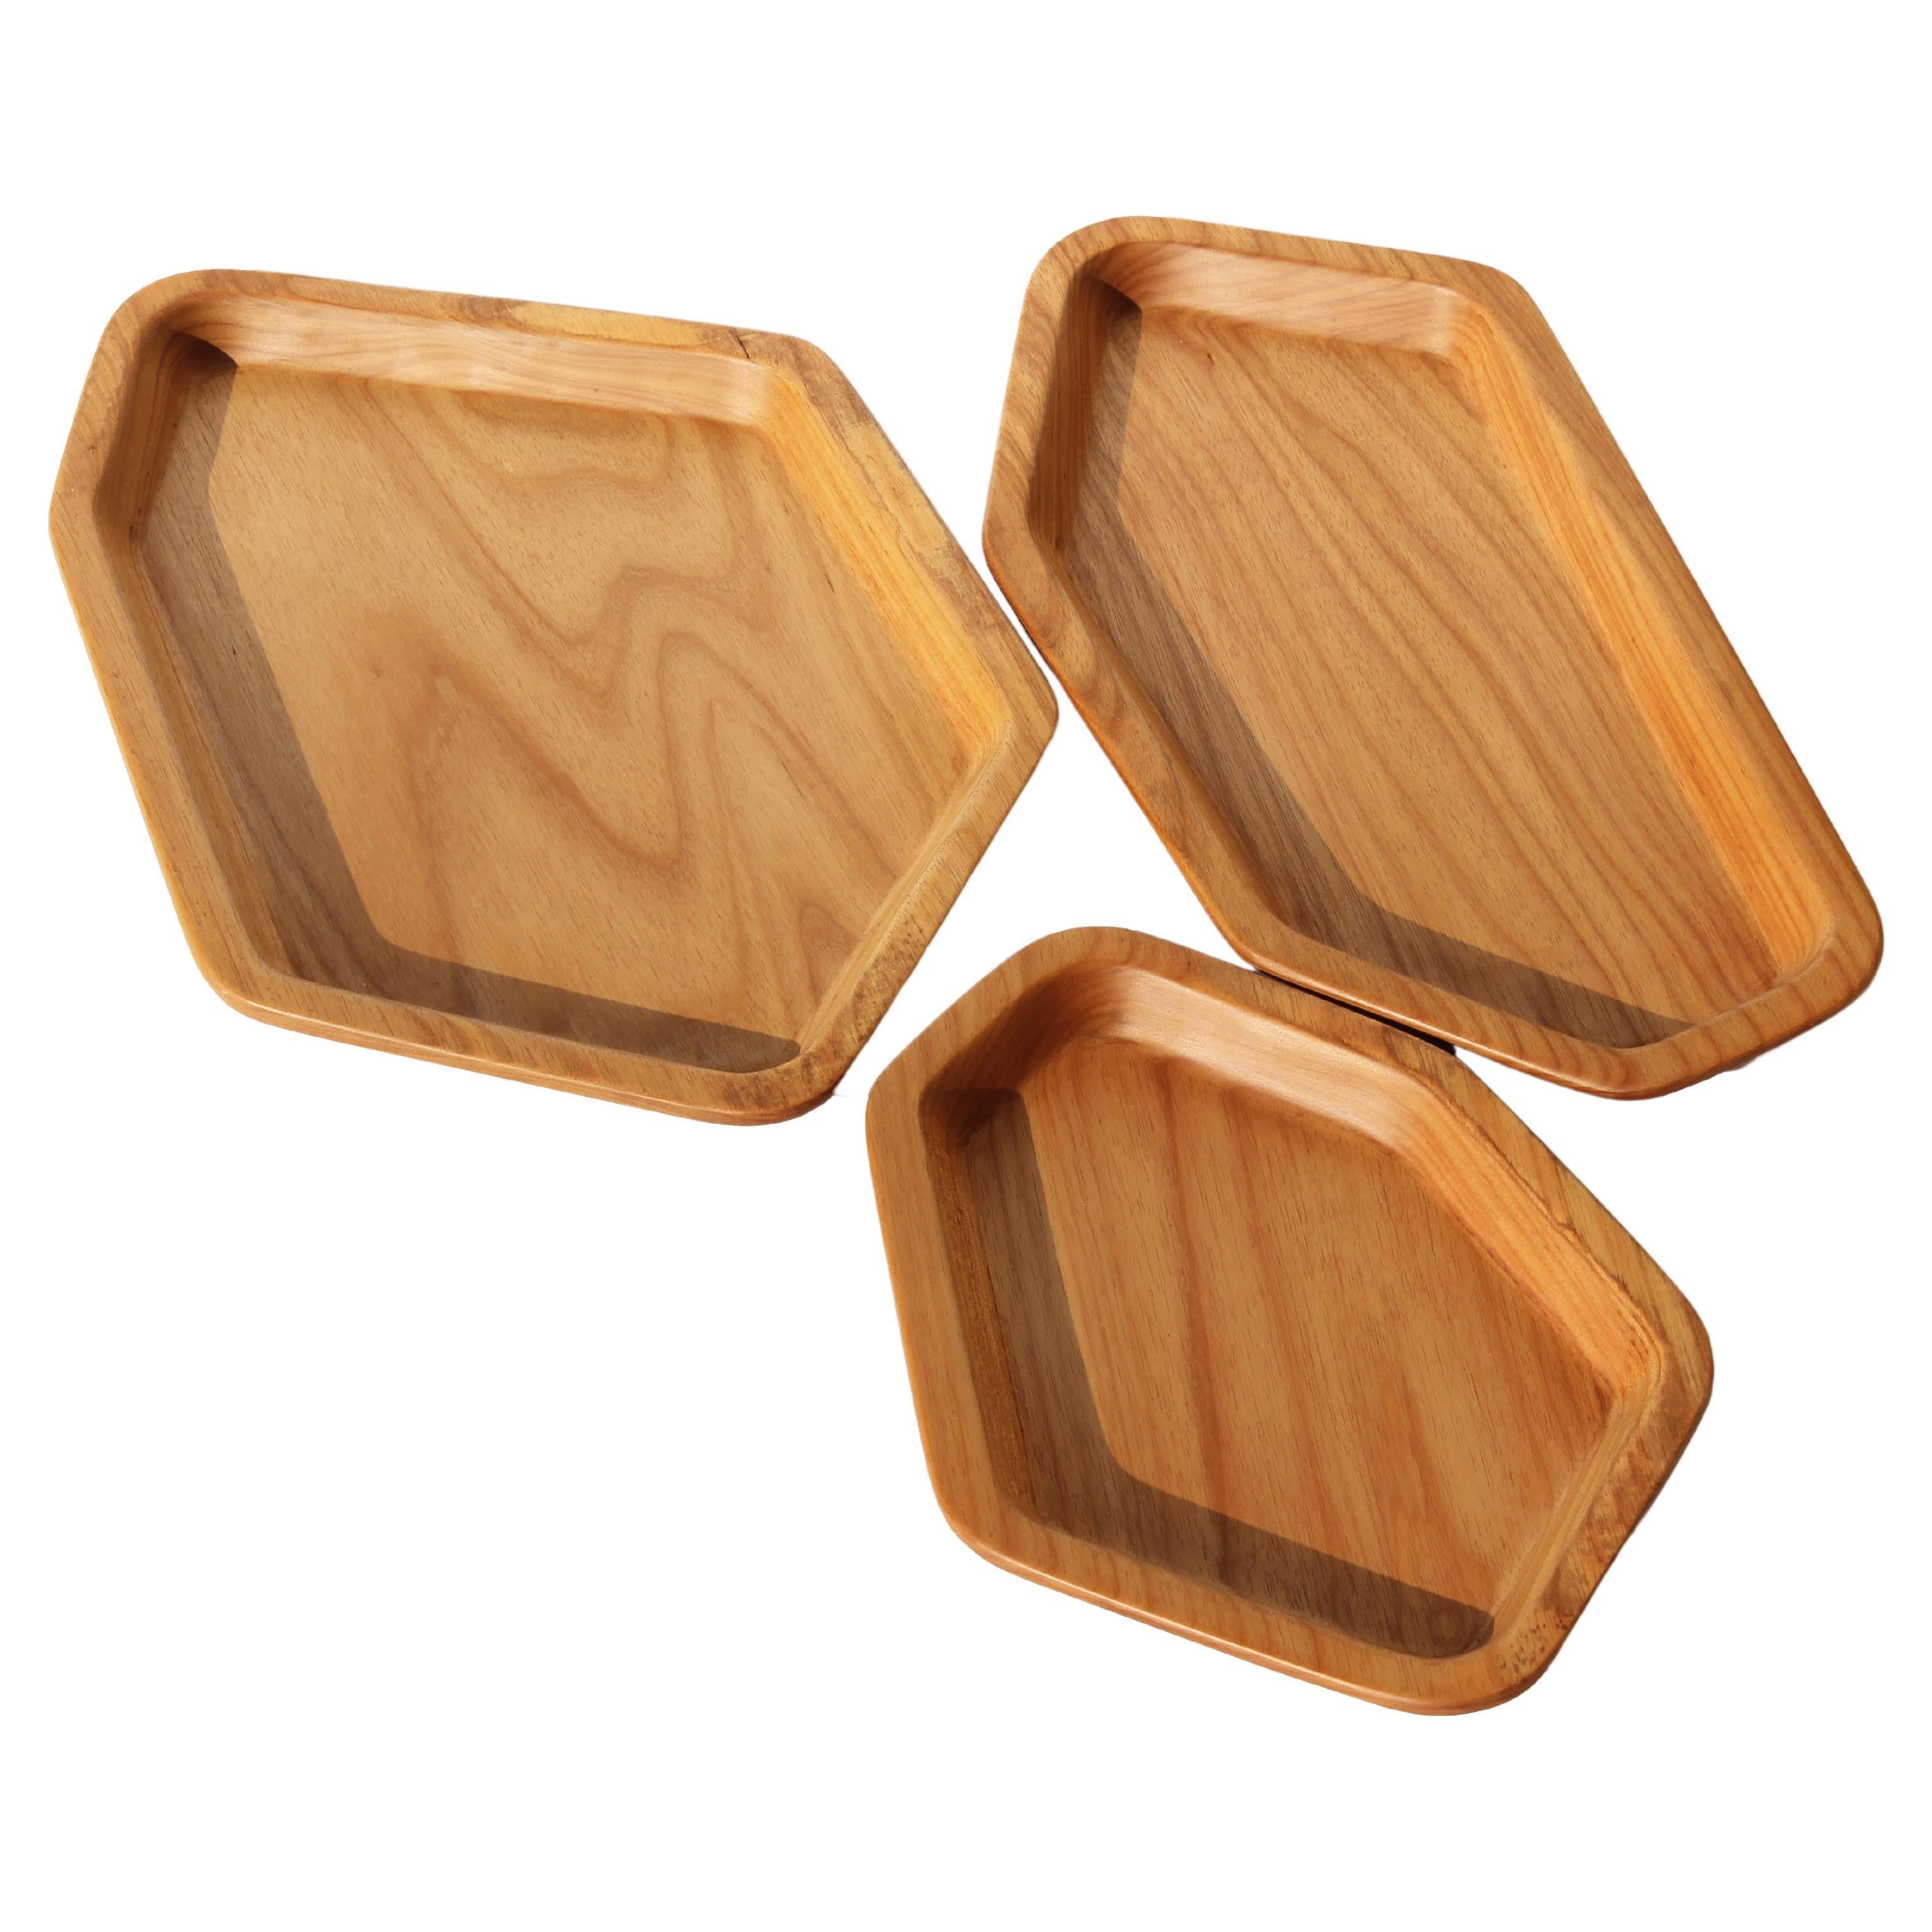 Transgrid wood tray - Set (Tauari - 3 pieces) For Sale